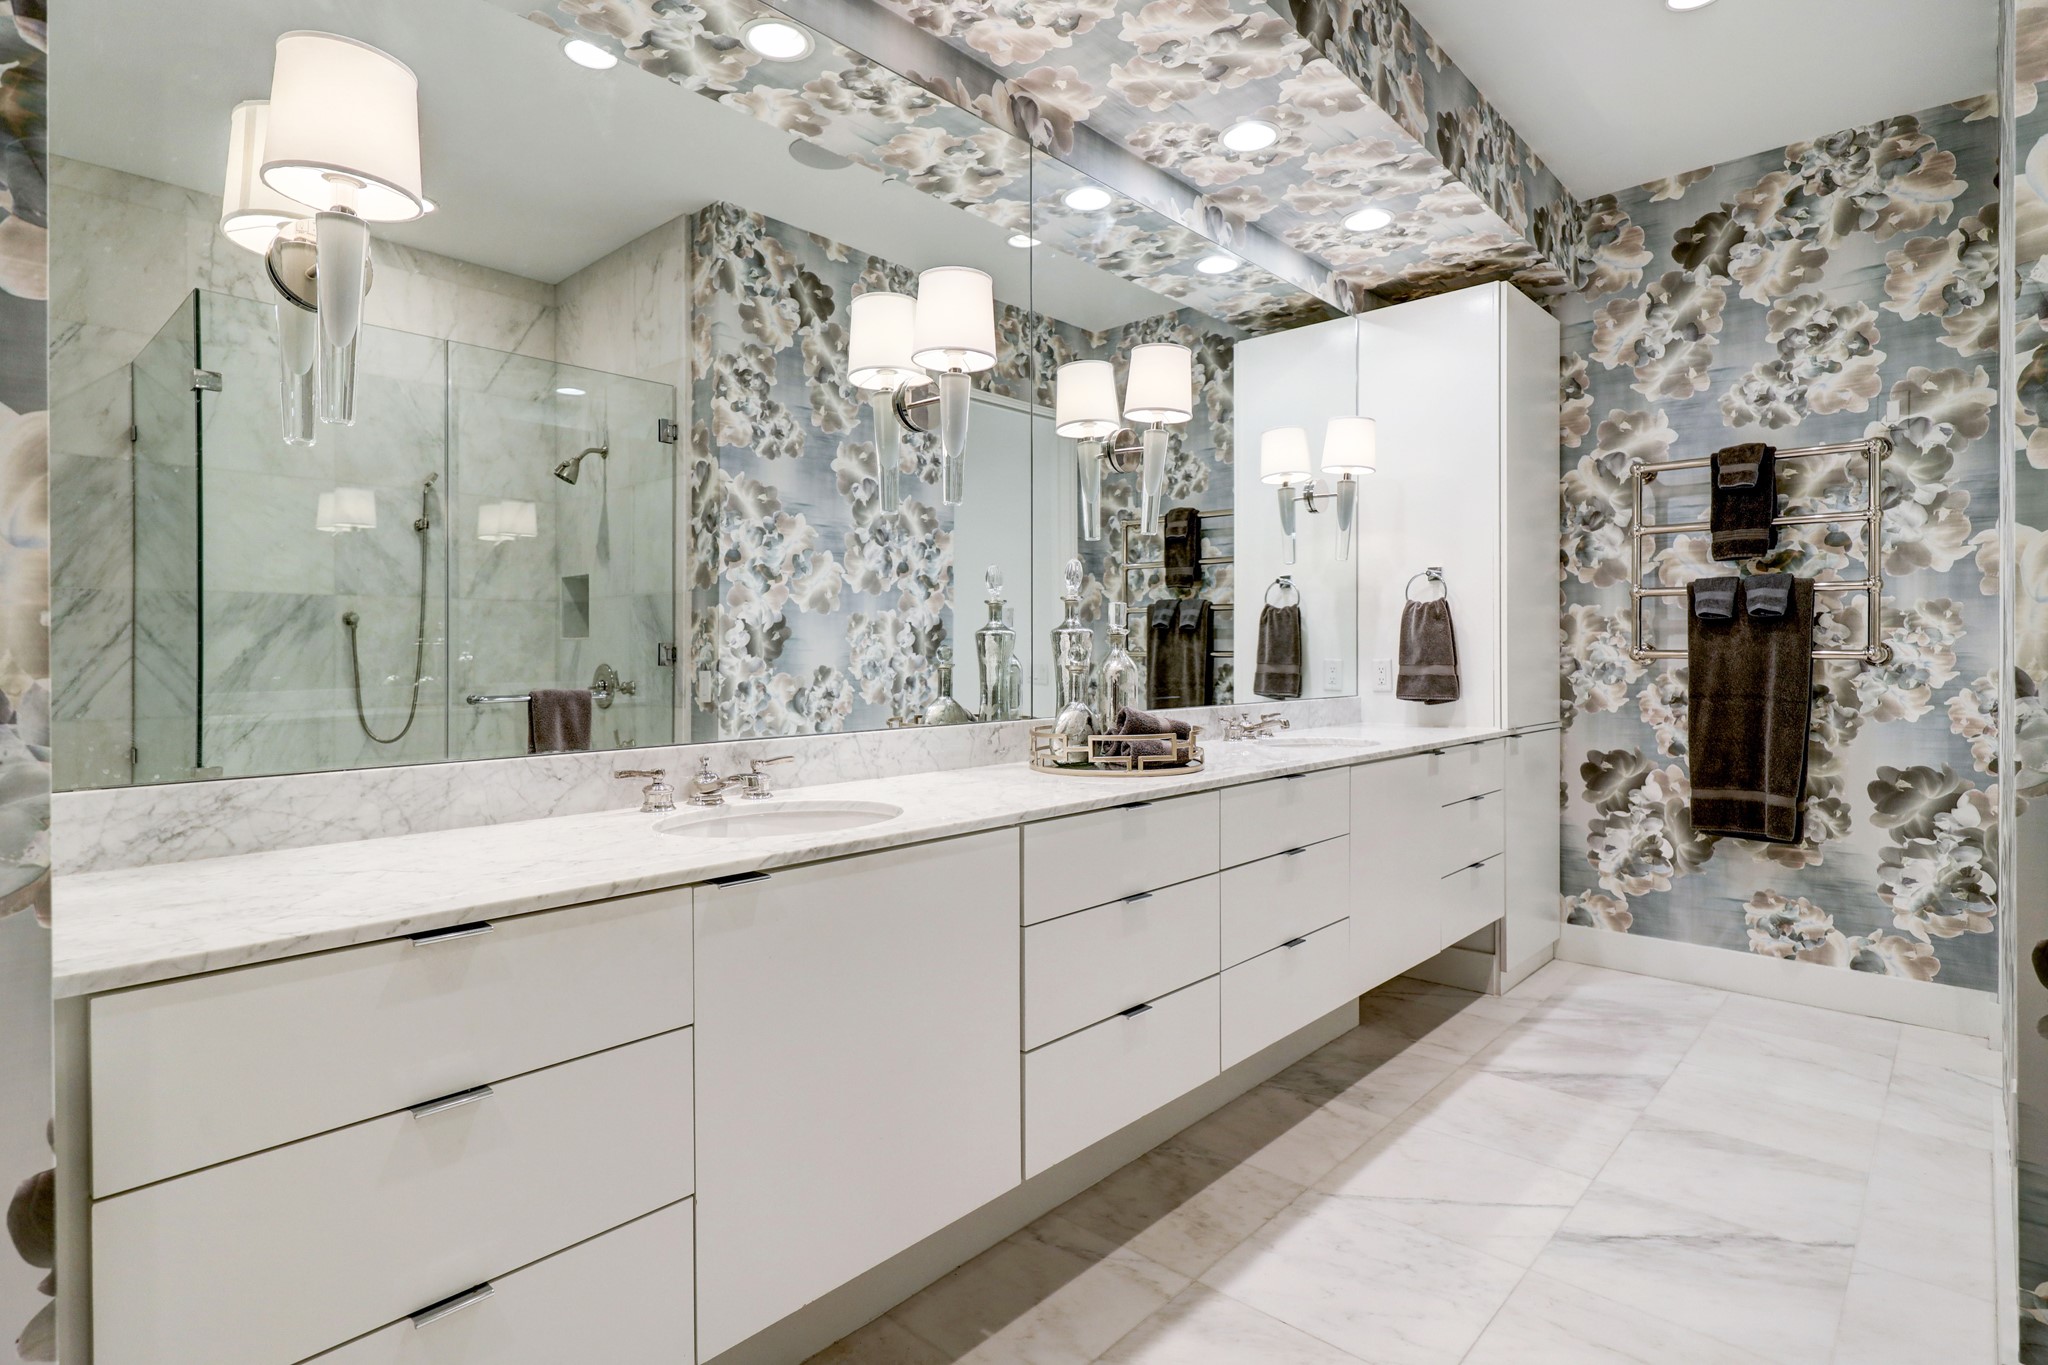 Nickel fixtures, designer sconces and a mounted towel heater!